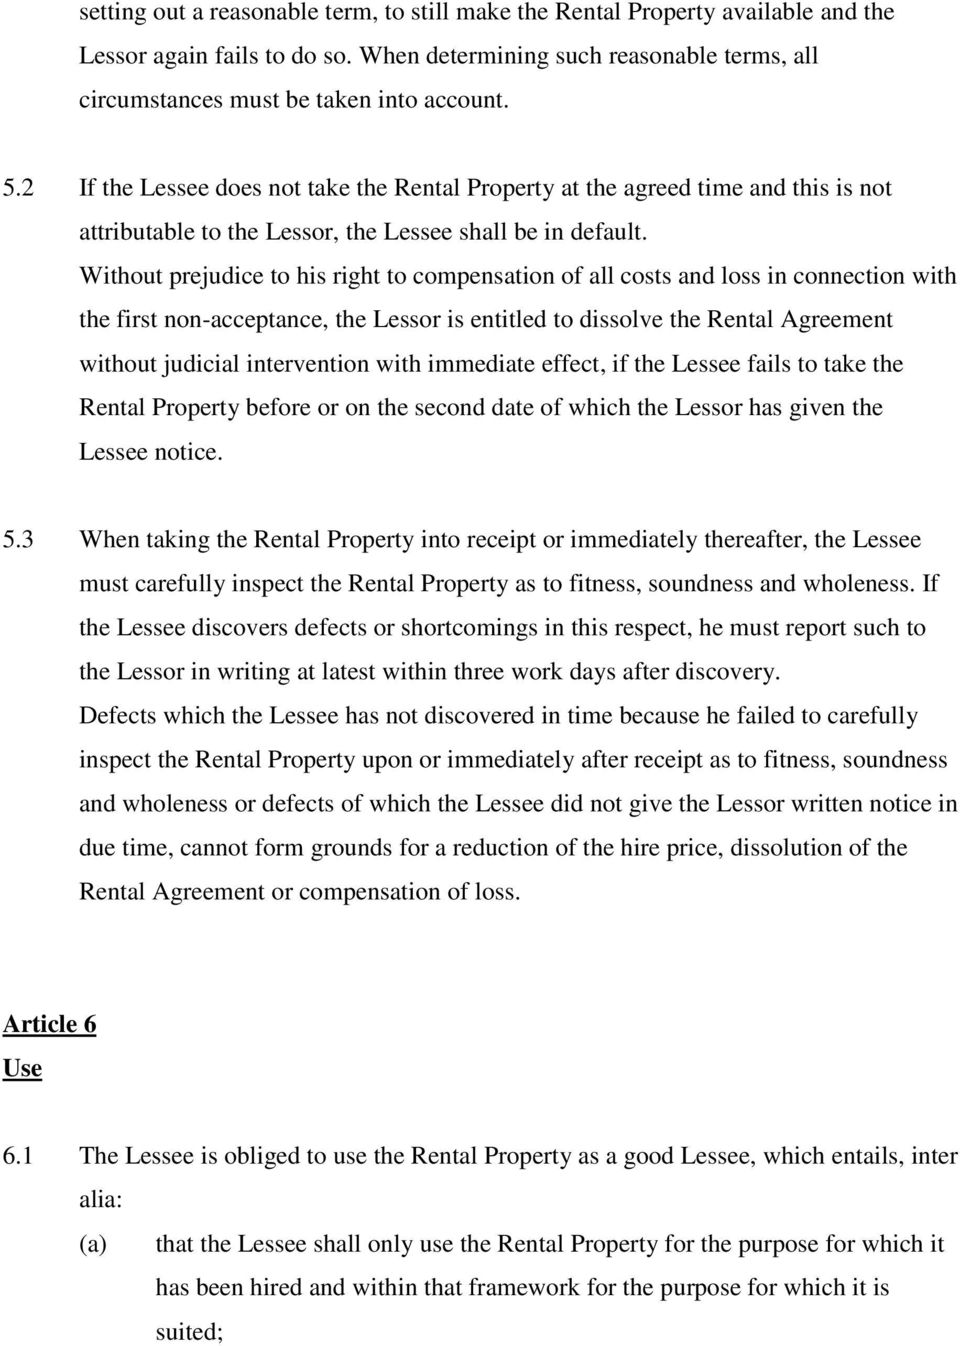 Without prejudice to his right to compensation of all costs and loss in connection with the first non-acceptance, the Lessor is entitled to dissolve the Rental Agreement without judicial intervention